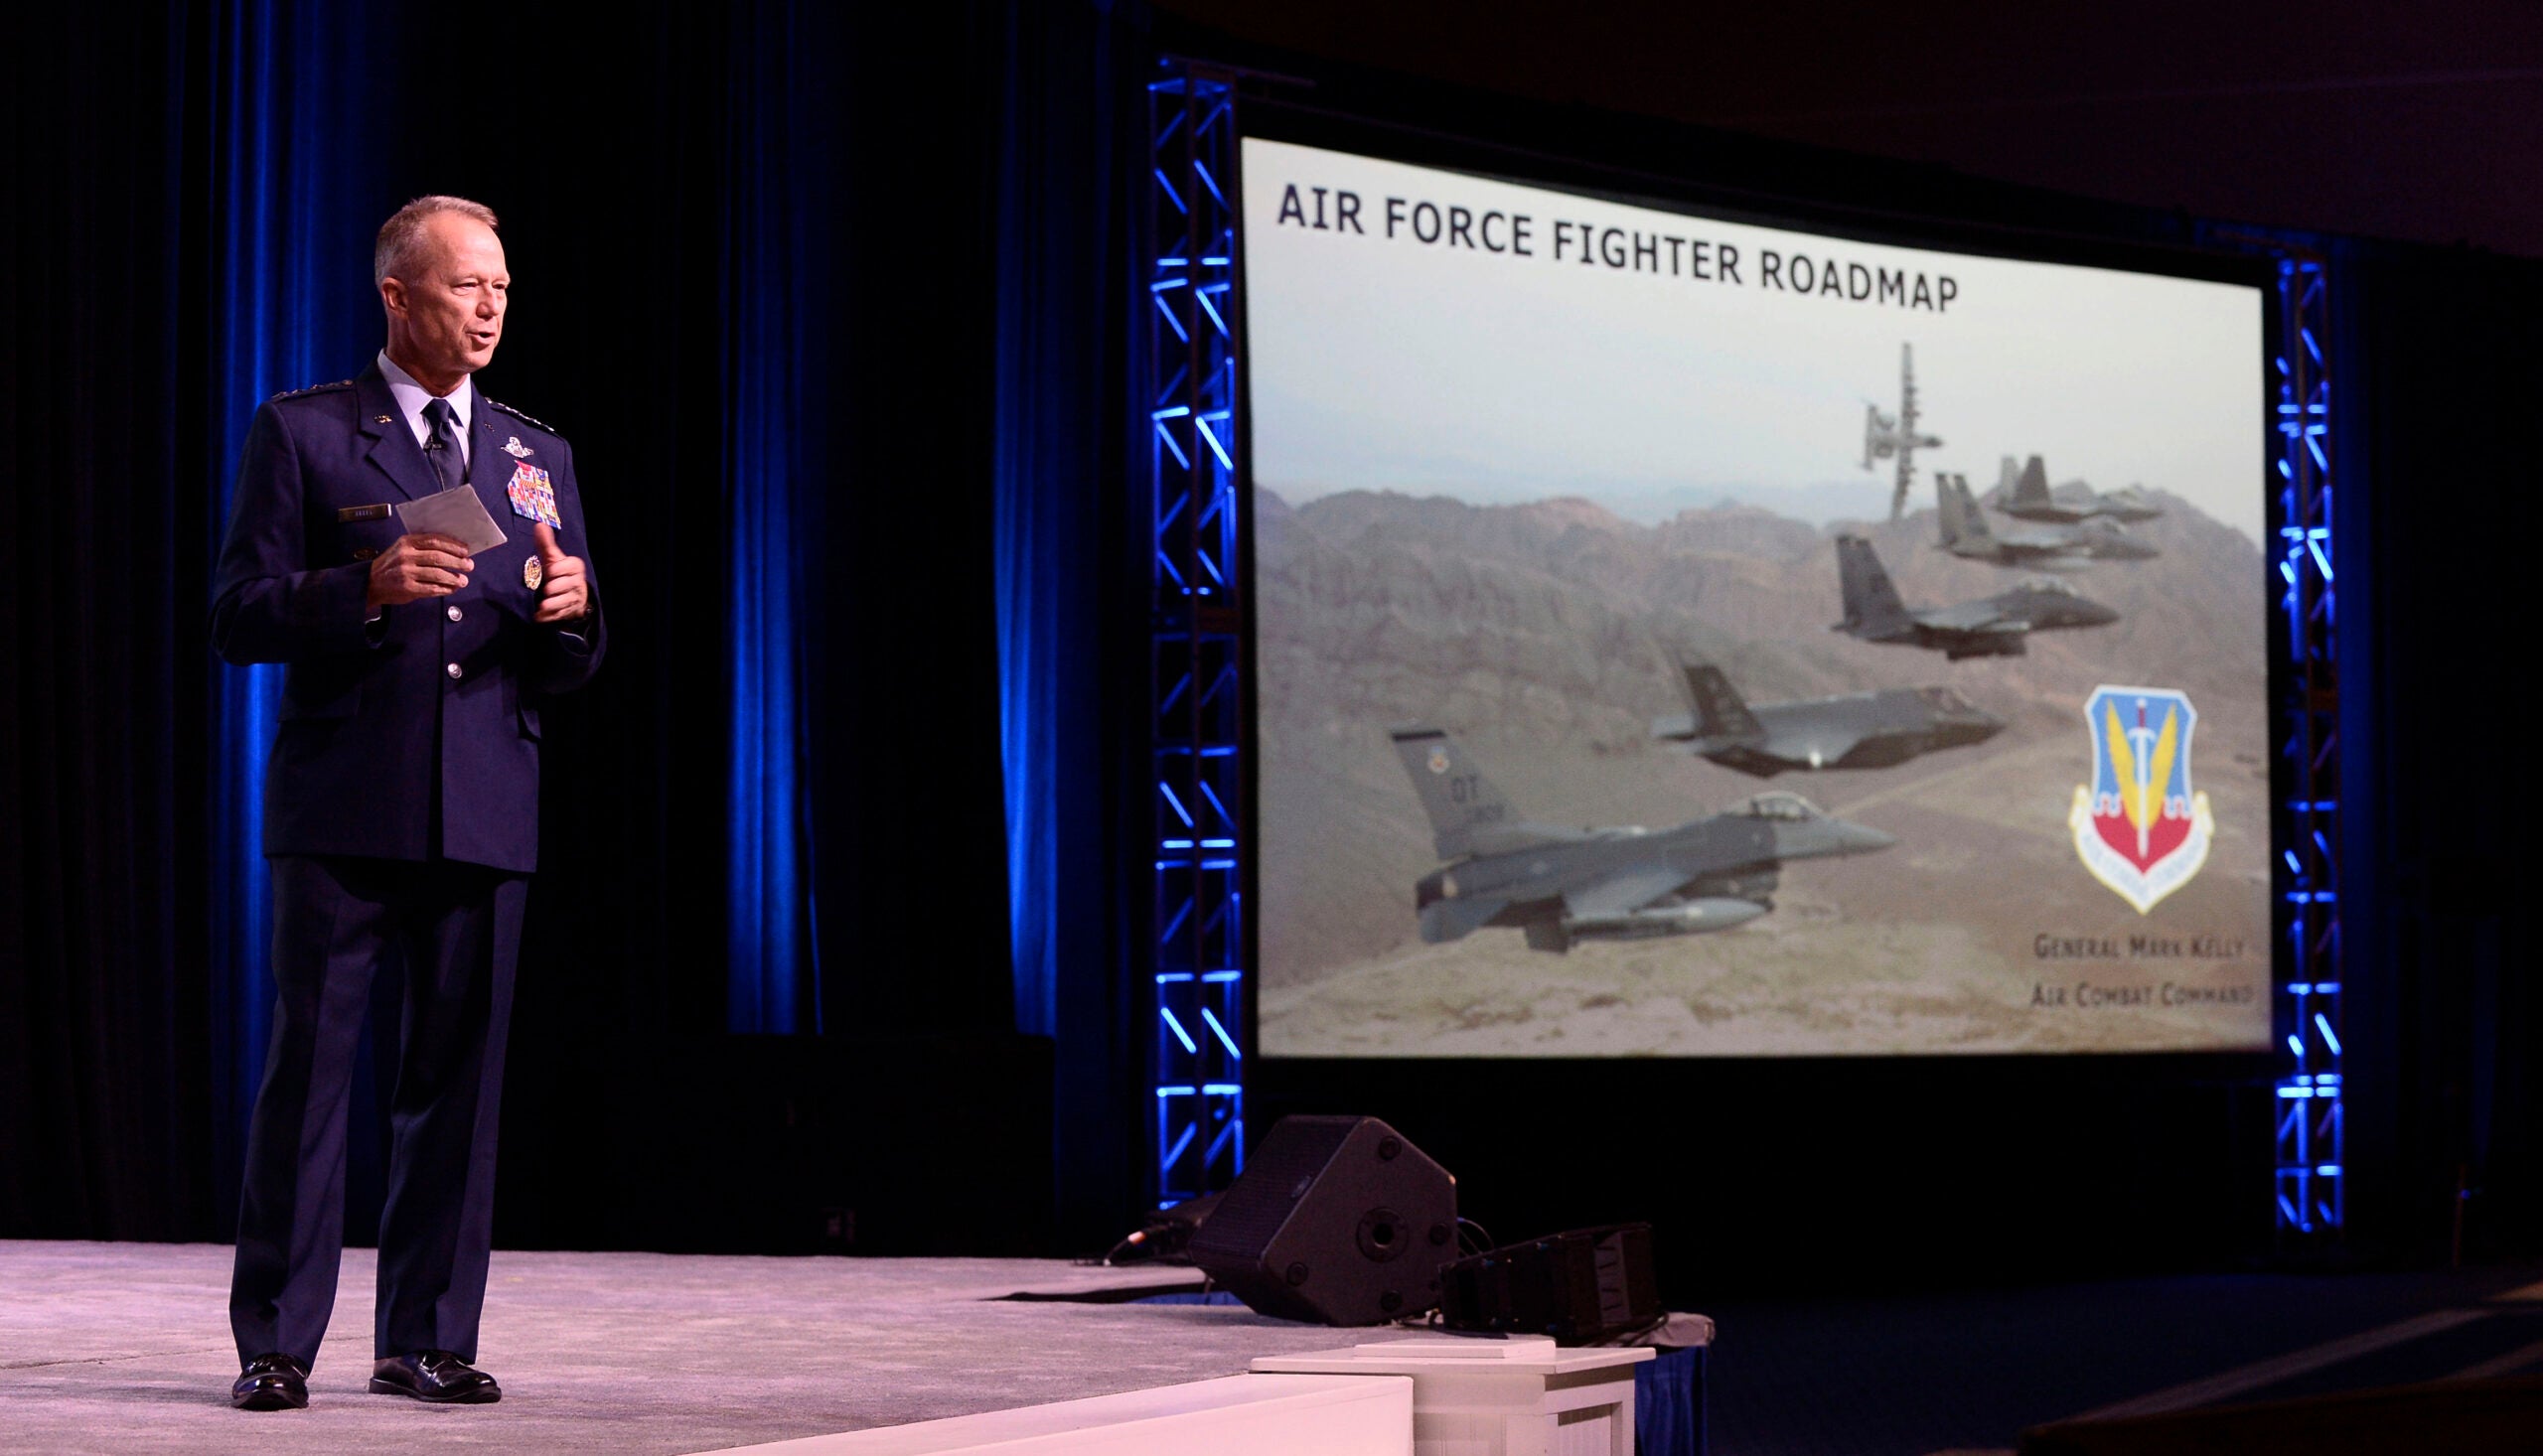 Gen. Mark D. Kelly, Air Combat Command commander, speaks at the Air Force Association's Air, Space &amp; Cyber Conference in National Harbor, Md., Sept. 22, 2021. Kelly spoke and answered questions on the topic of the "Fighter Roadmap." (U.S. Air Force illustration by Tech. Sgt. Joshua R. M. Dewberry)